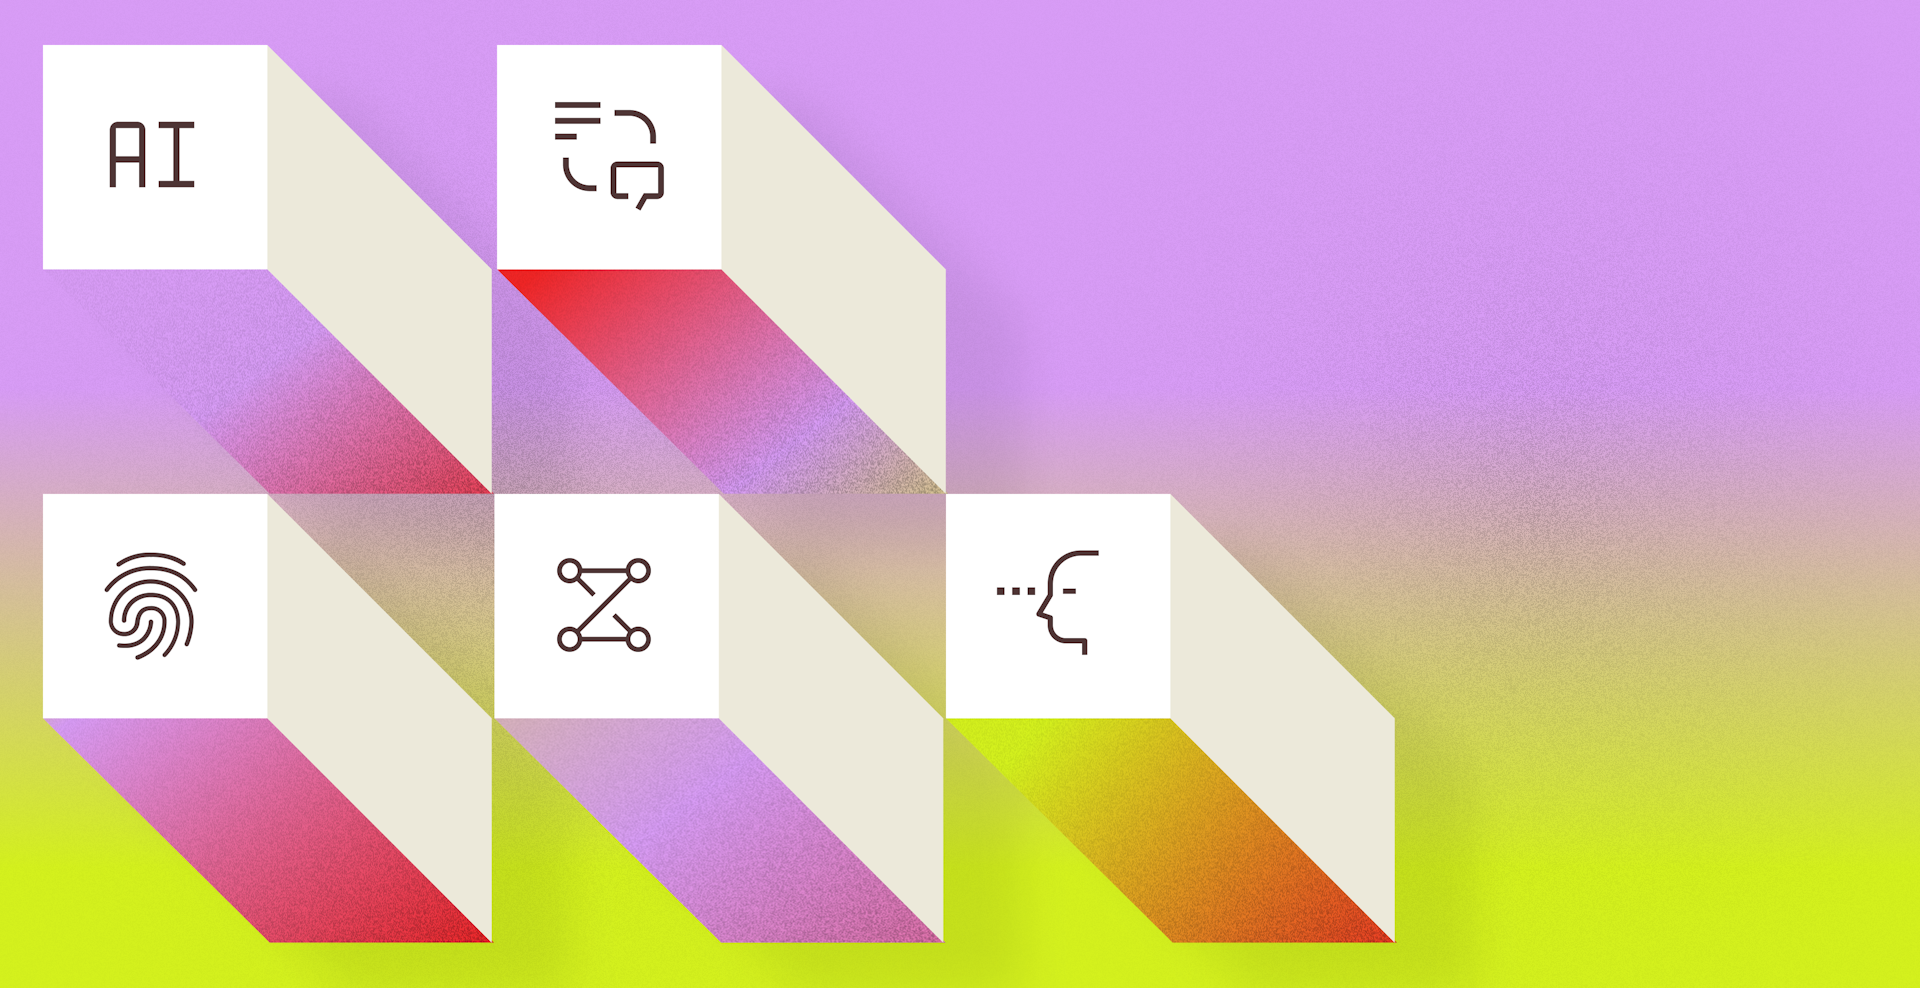 Five icons representing artificial intelligence, text-to-speech, personalization, the internet of things and the internet of behavior, and augmented reality and virtual reality on a pink and yellow gradient background